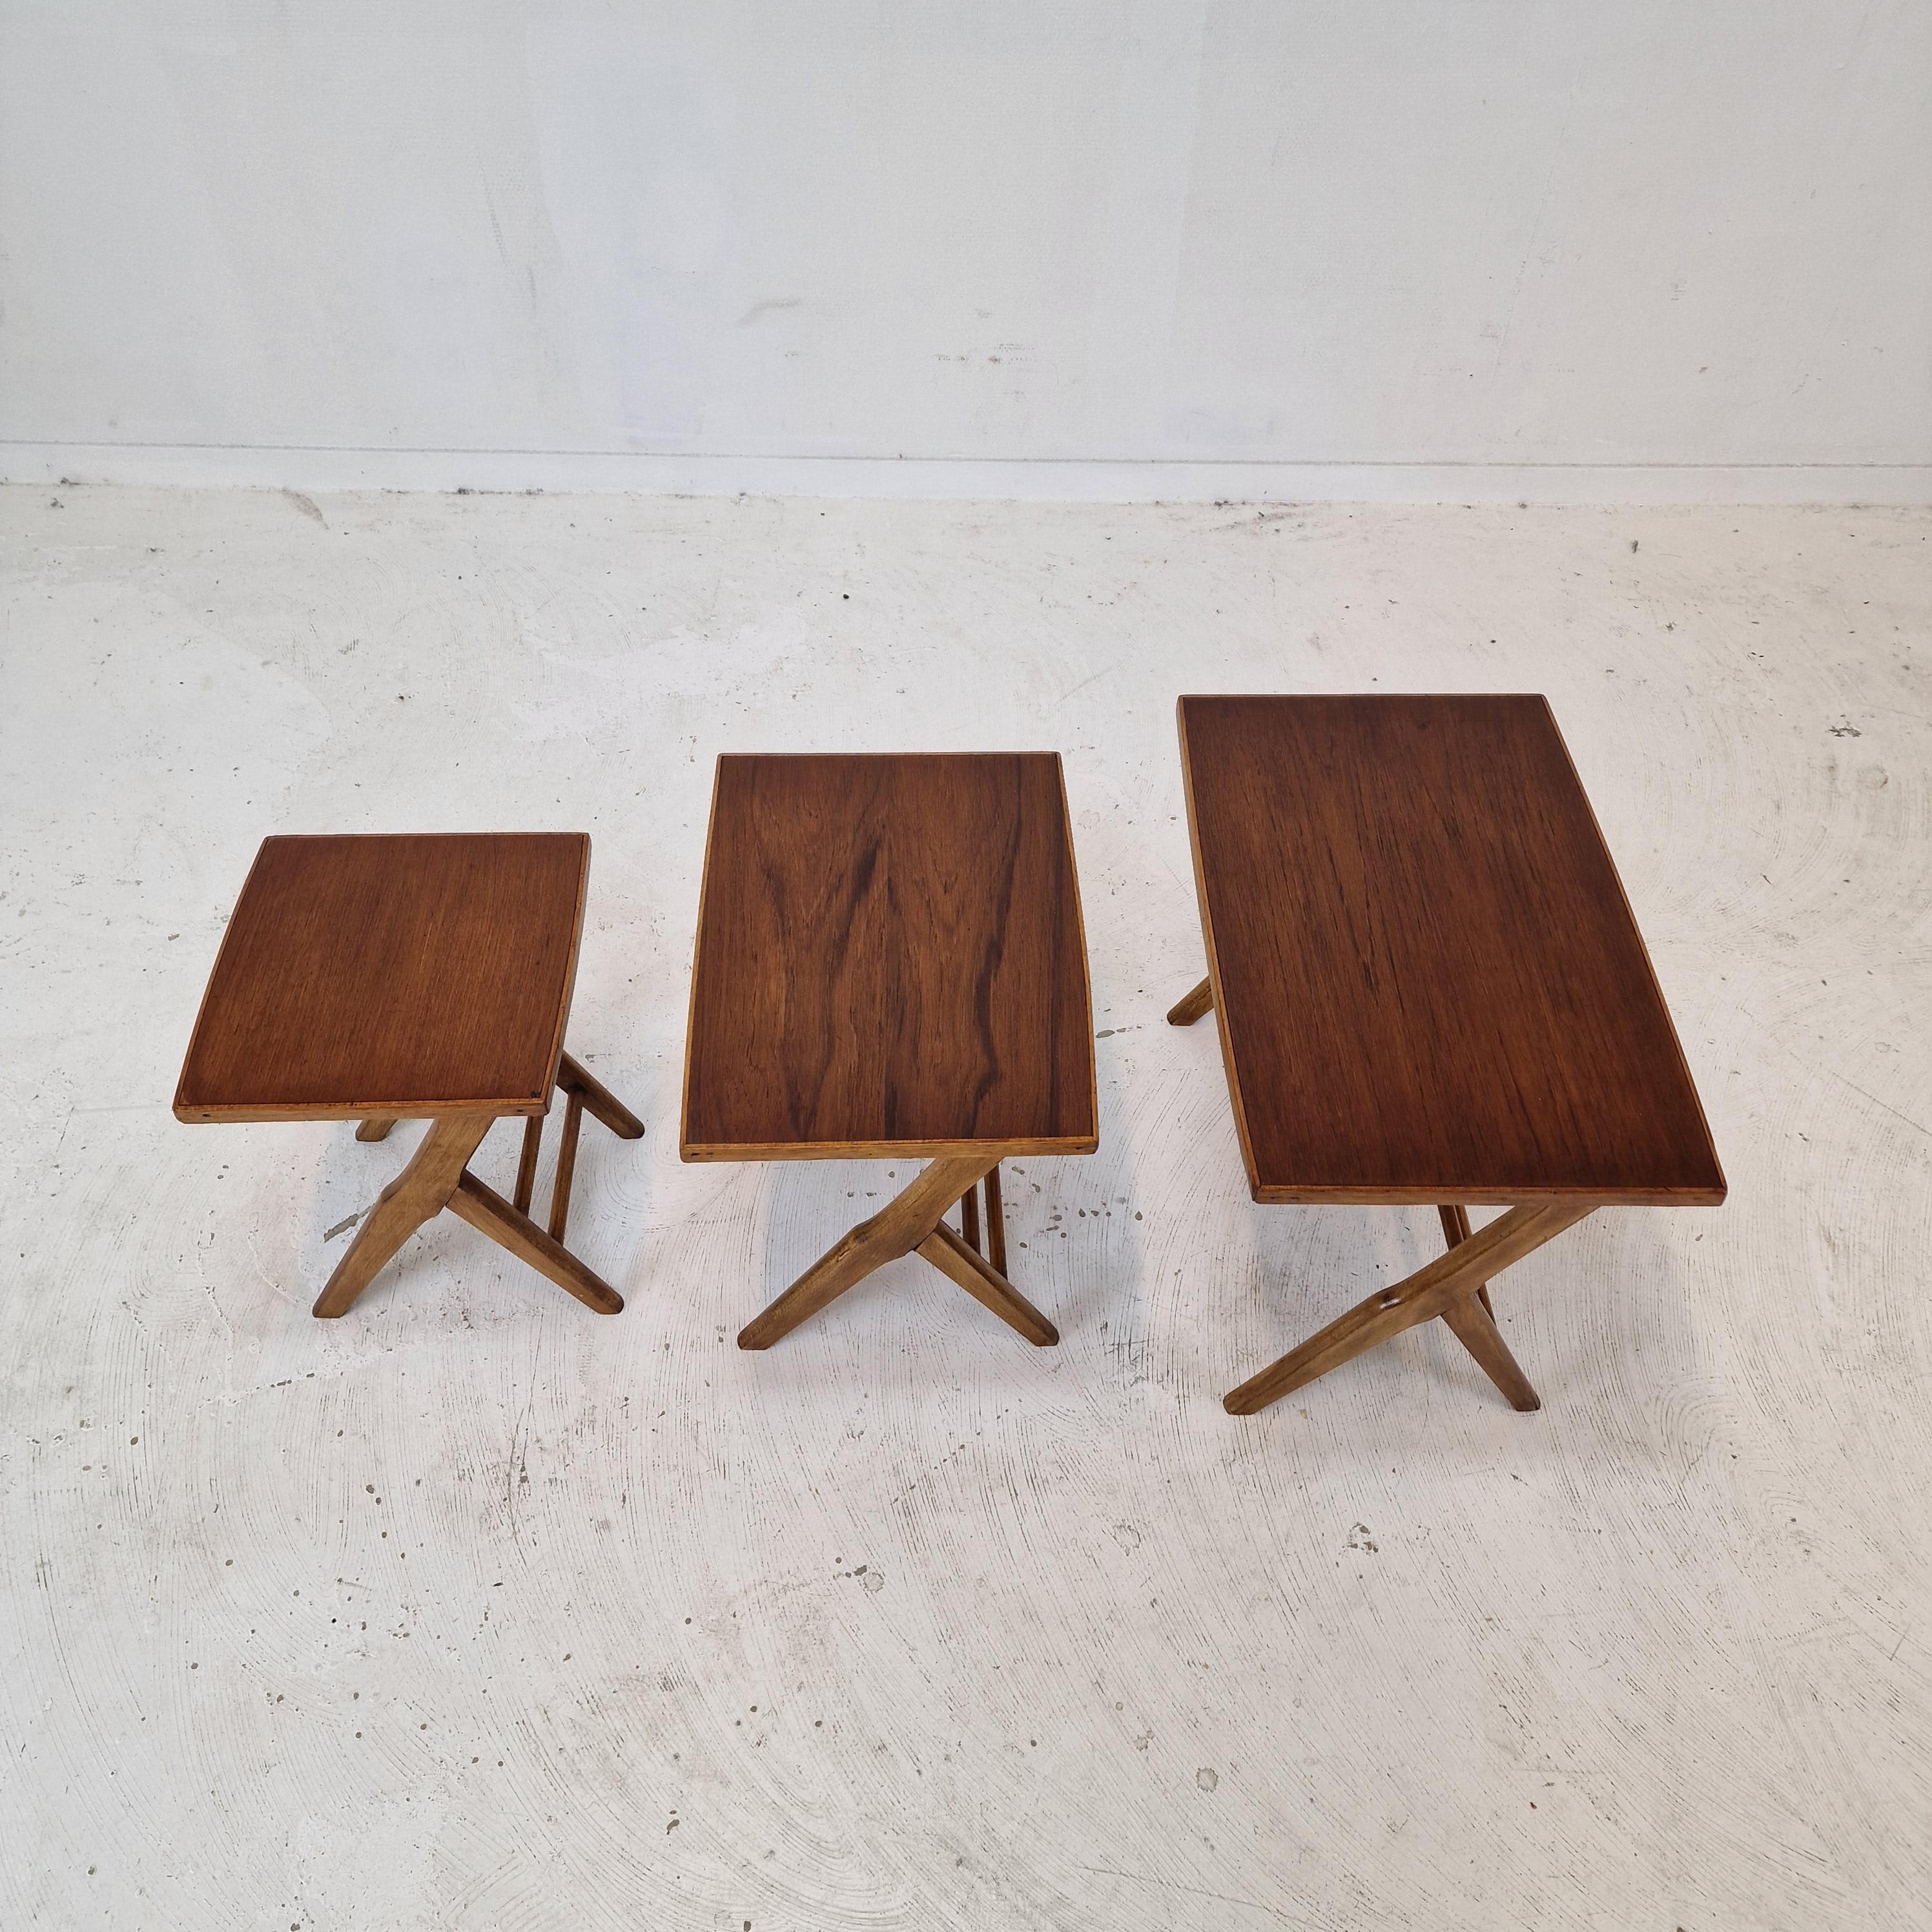 Set of 3 Wooden Nesting Tables, Holland 1960s For Sale 2